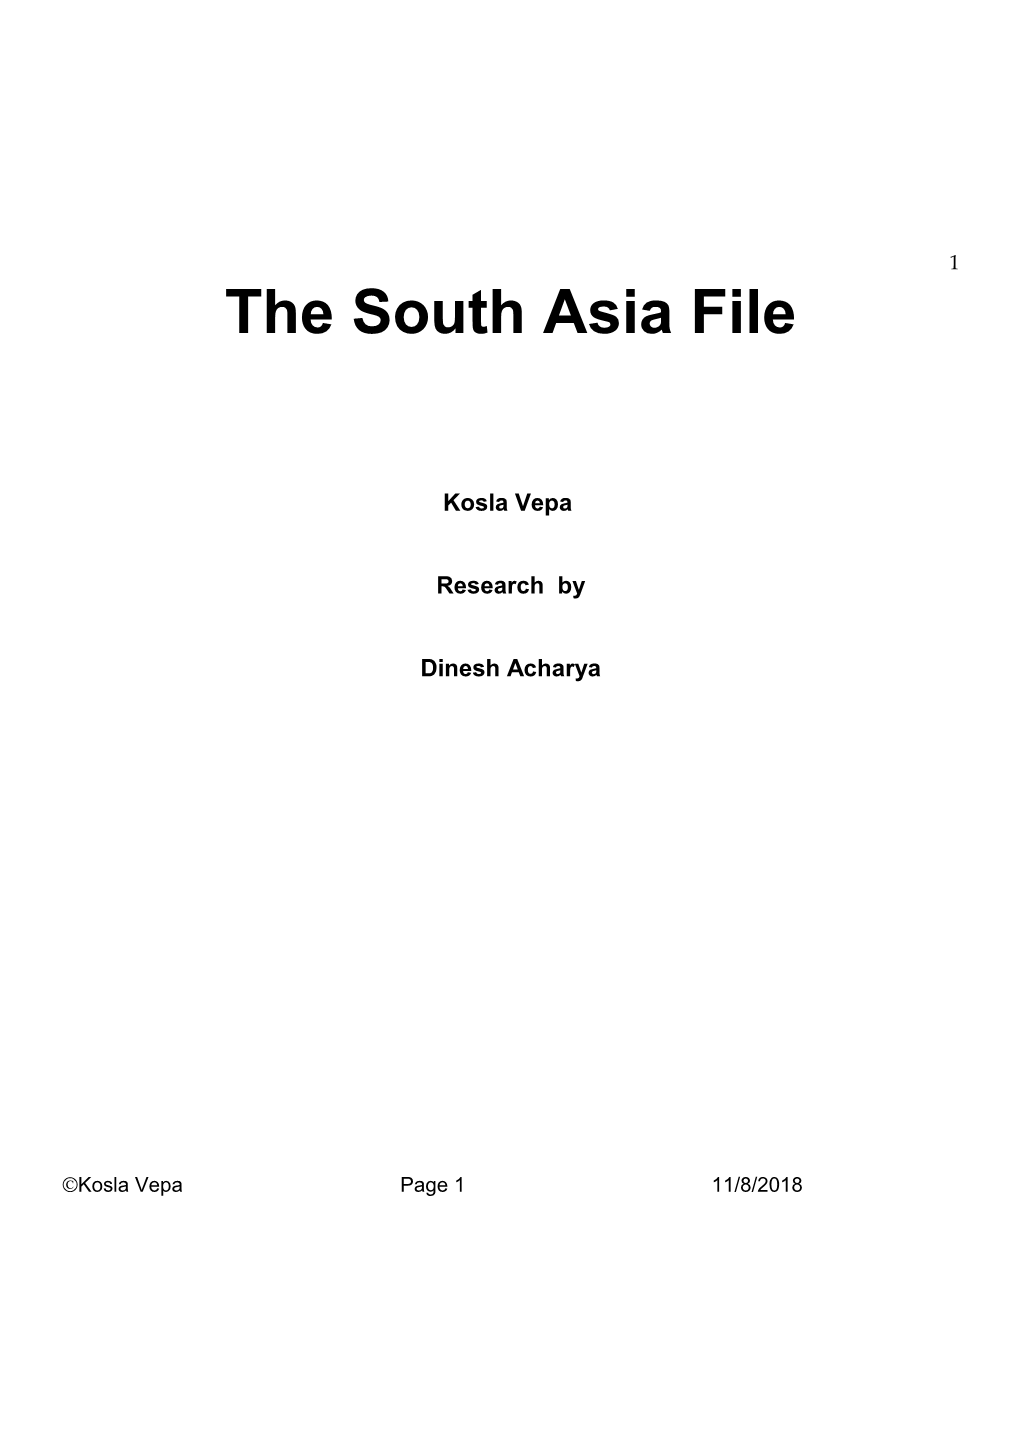 The South Asia File